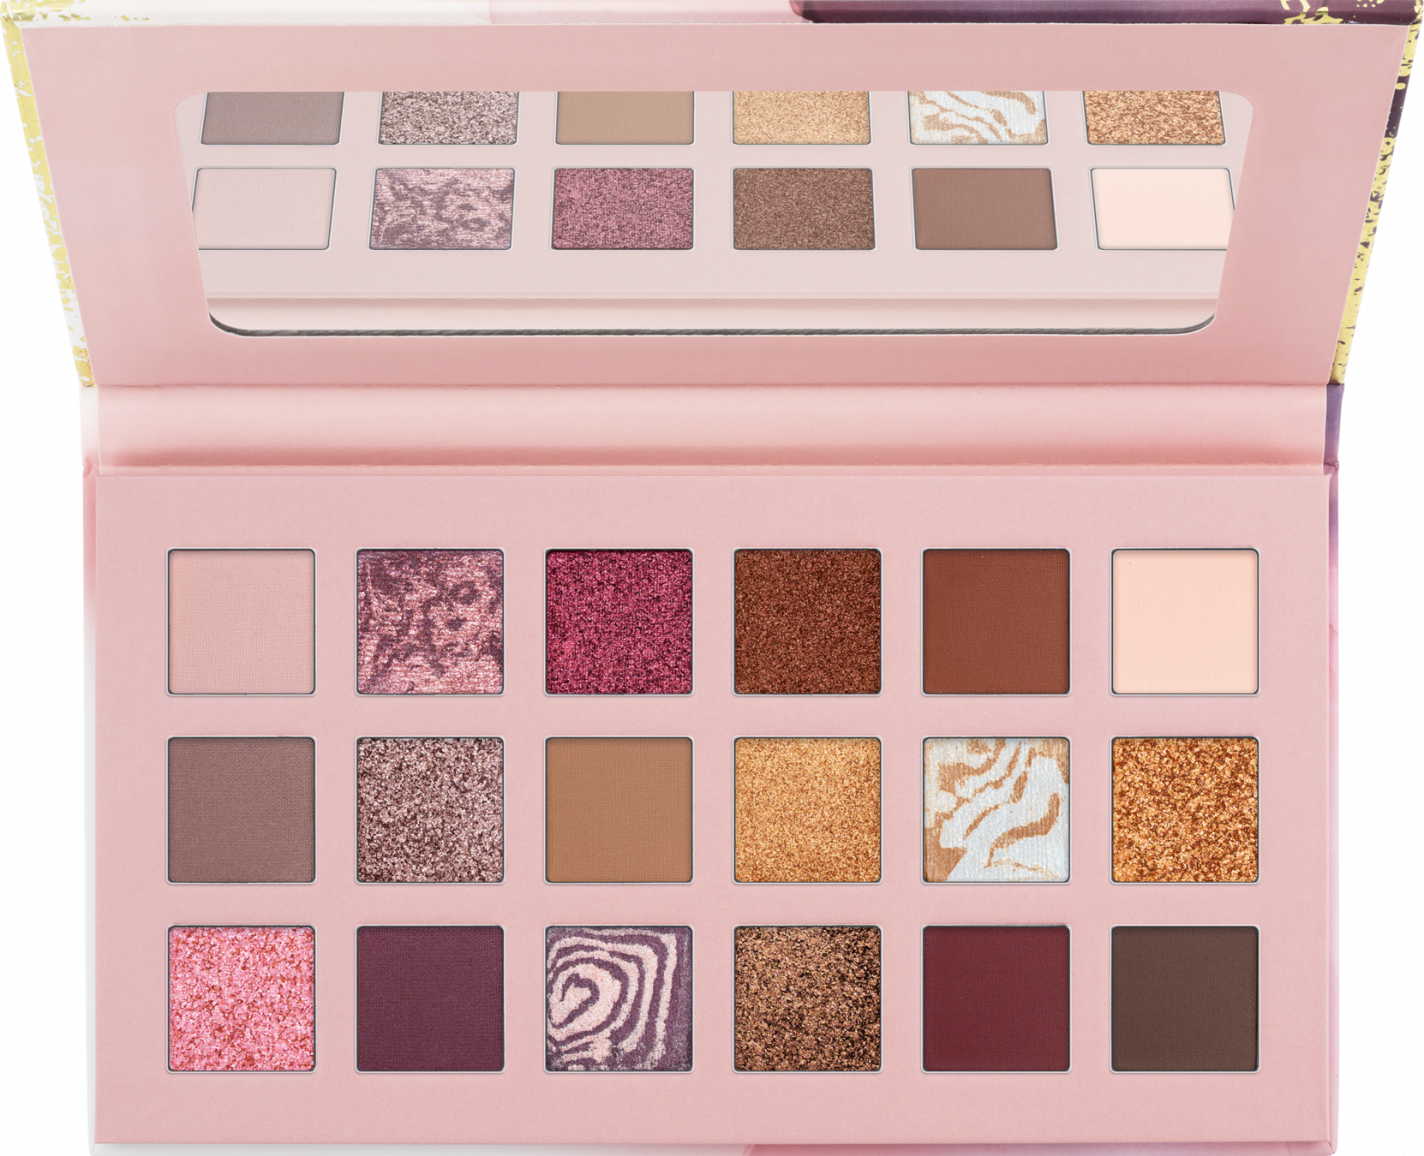 4059729343048_Catrice Daring Nude Eyeshadow Palette_Image_Front View Full Open_png.png